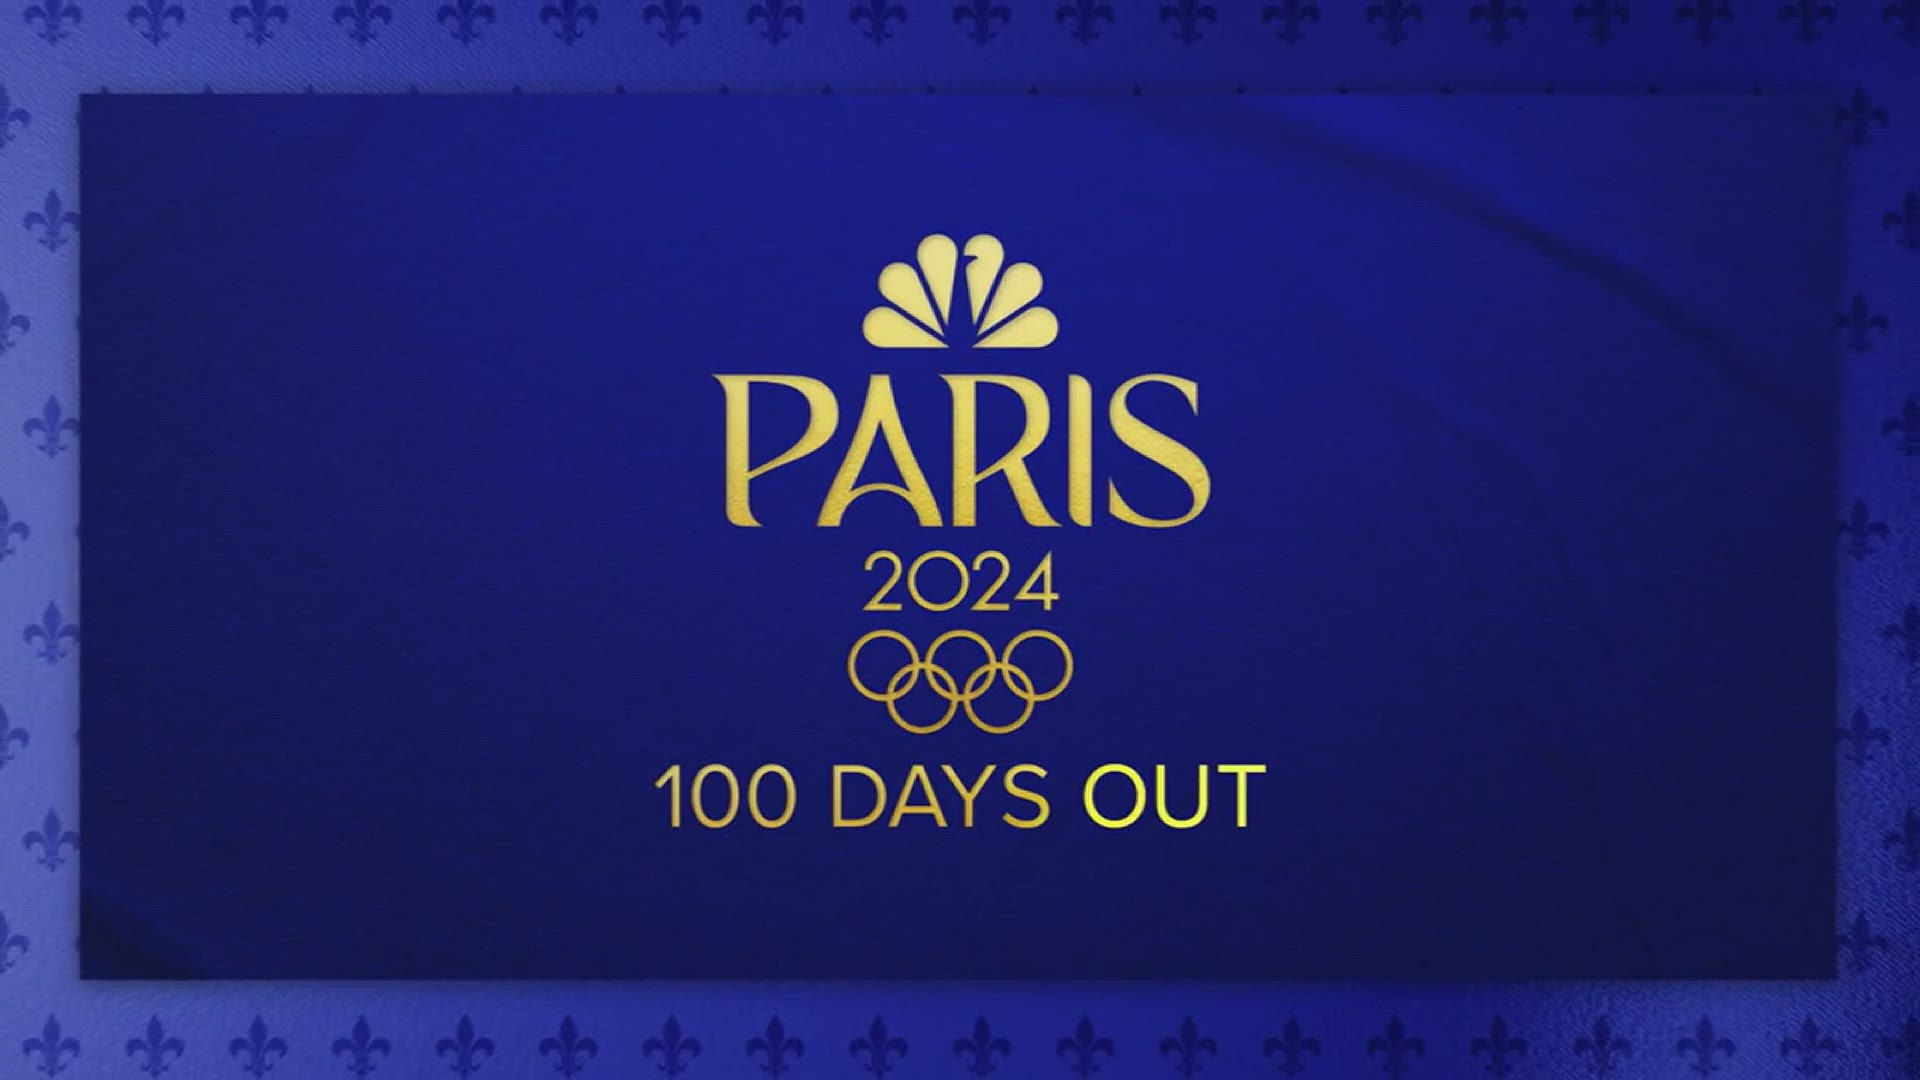 We are 100 days away from the 2024 Paris Olympics.